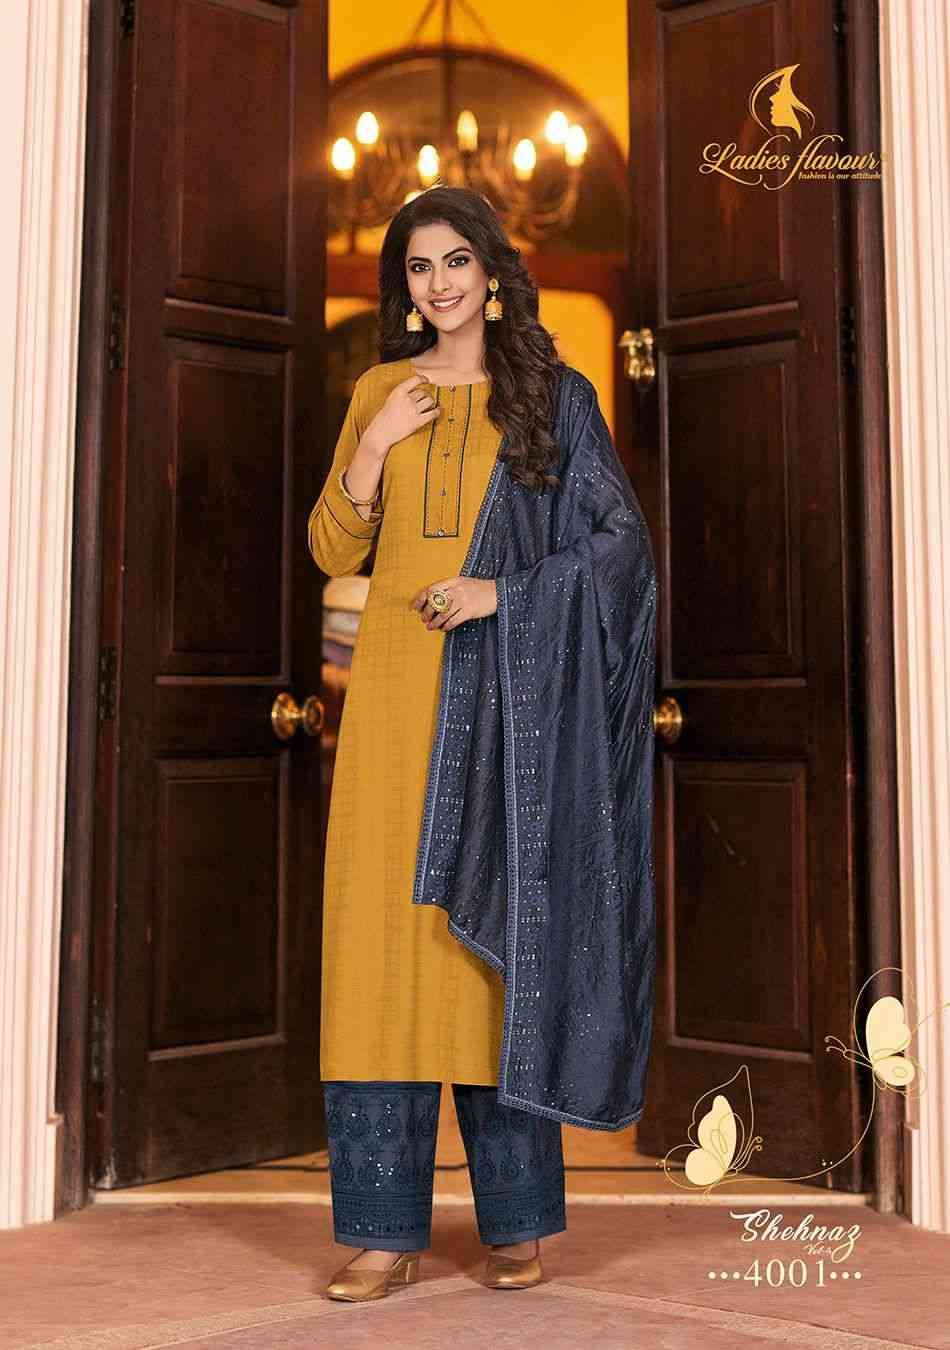 Shehnaz Vol-4 By Ladies Flavour 4001 To 4004 Series Designer Festive Suits Beautiful Stylish Fancy Colorful Party Wear & Occasional Wear Heavy Rayon With Work Dresses At Wholesale Price